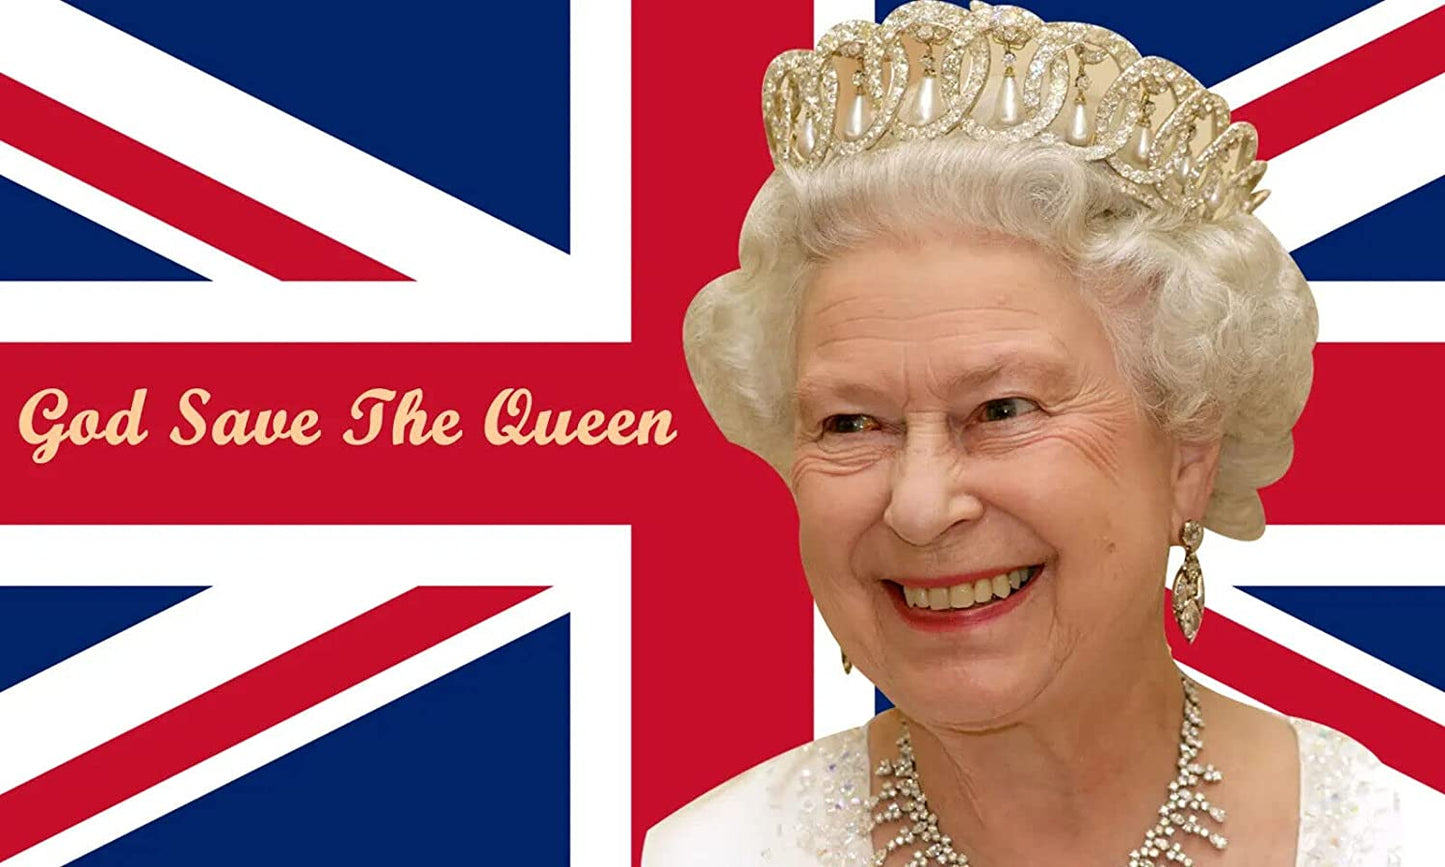 God save the Queen quality polyester flag 5ft x 3ft with eyelets